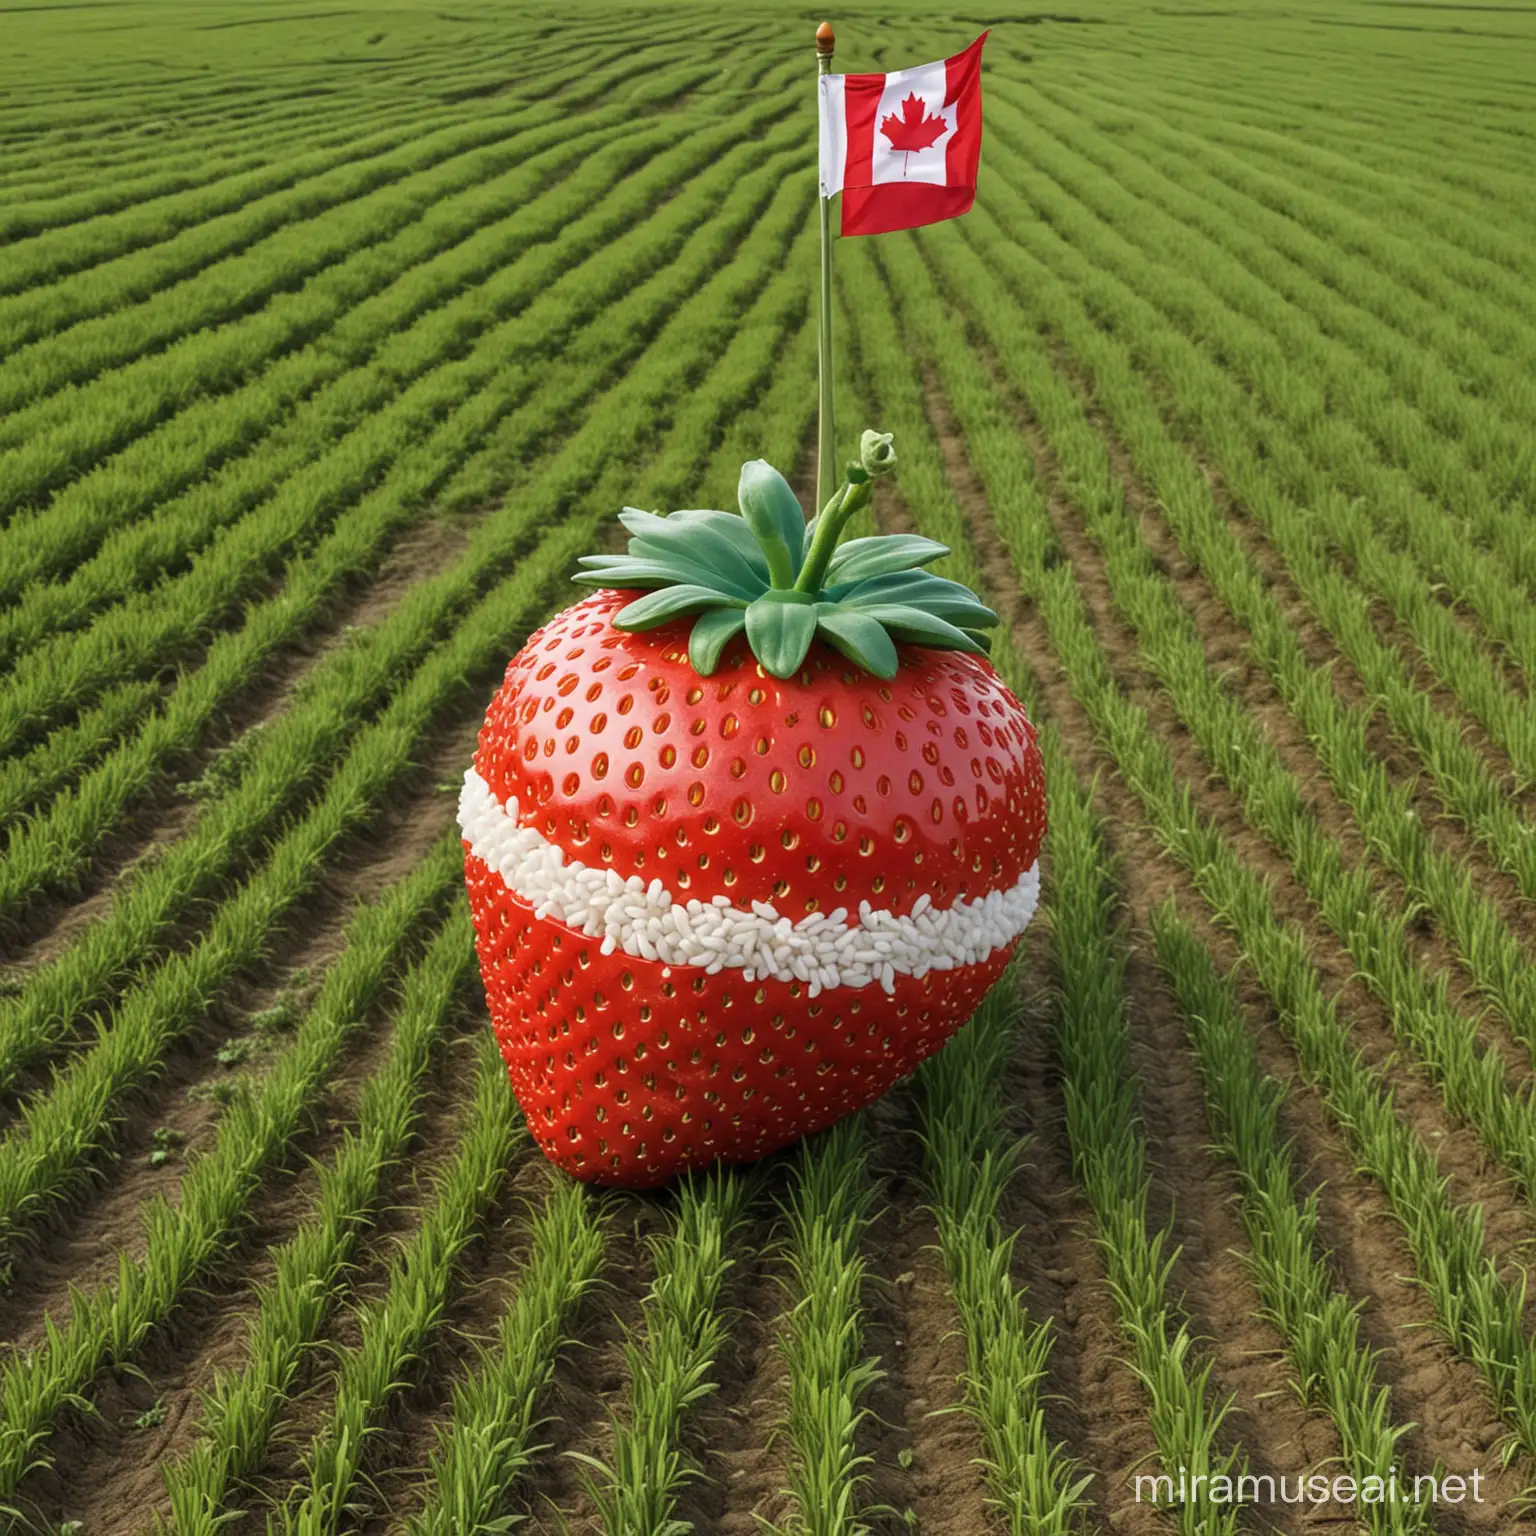 Giant Strawberry with Canadian Flag Theme Amidst Lush Rice Fields